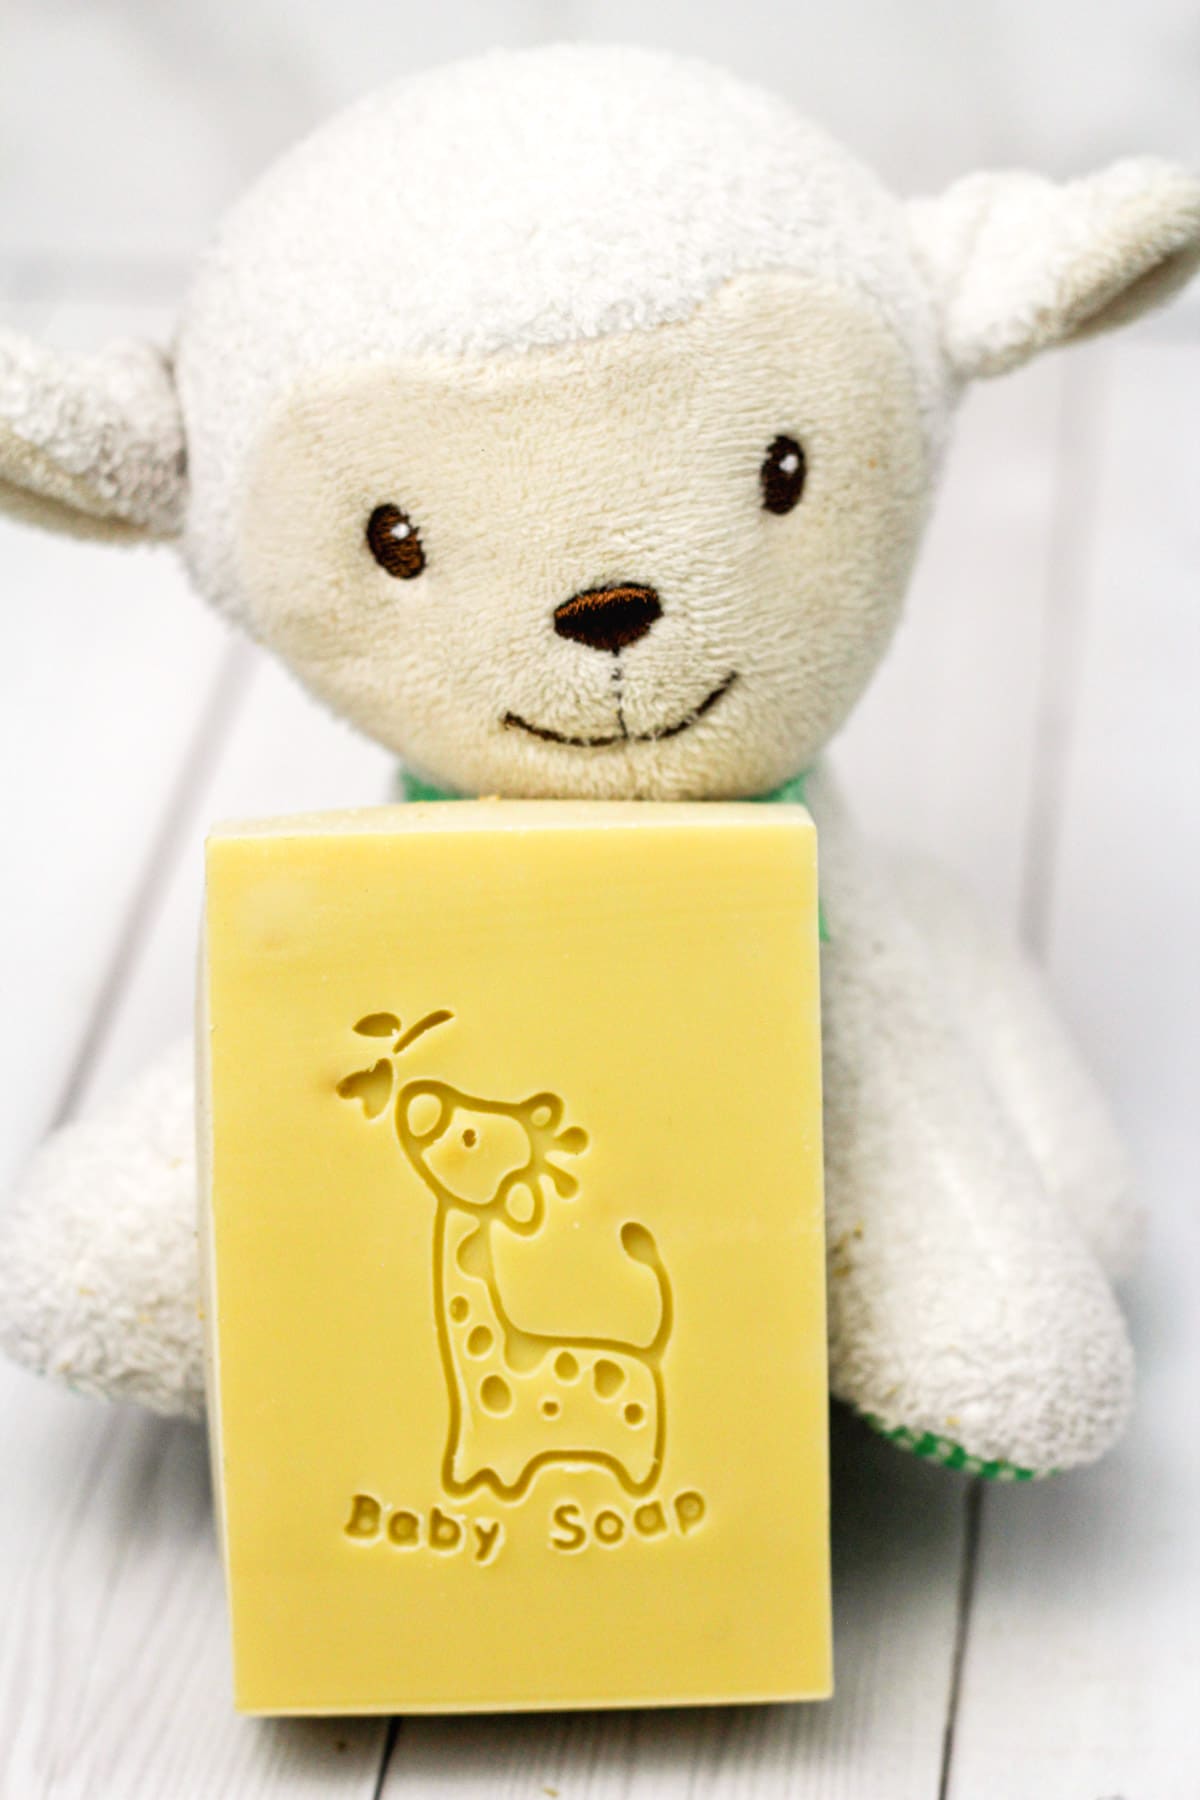 bar of baby soap held by stuffed animal.